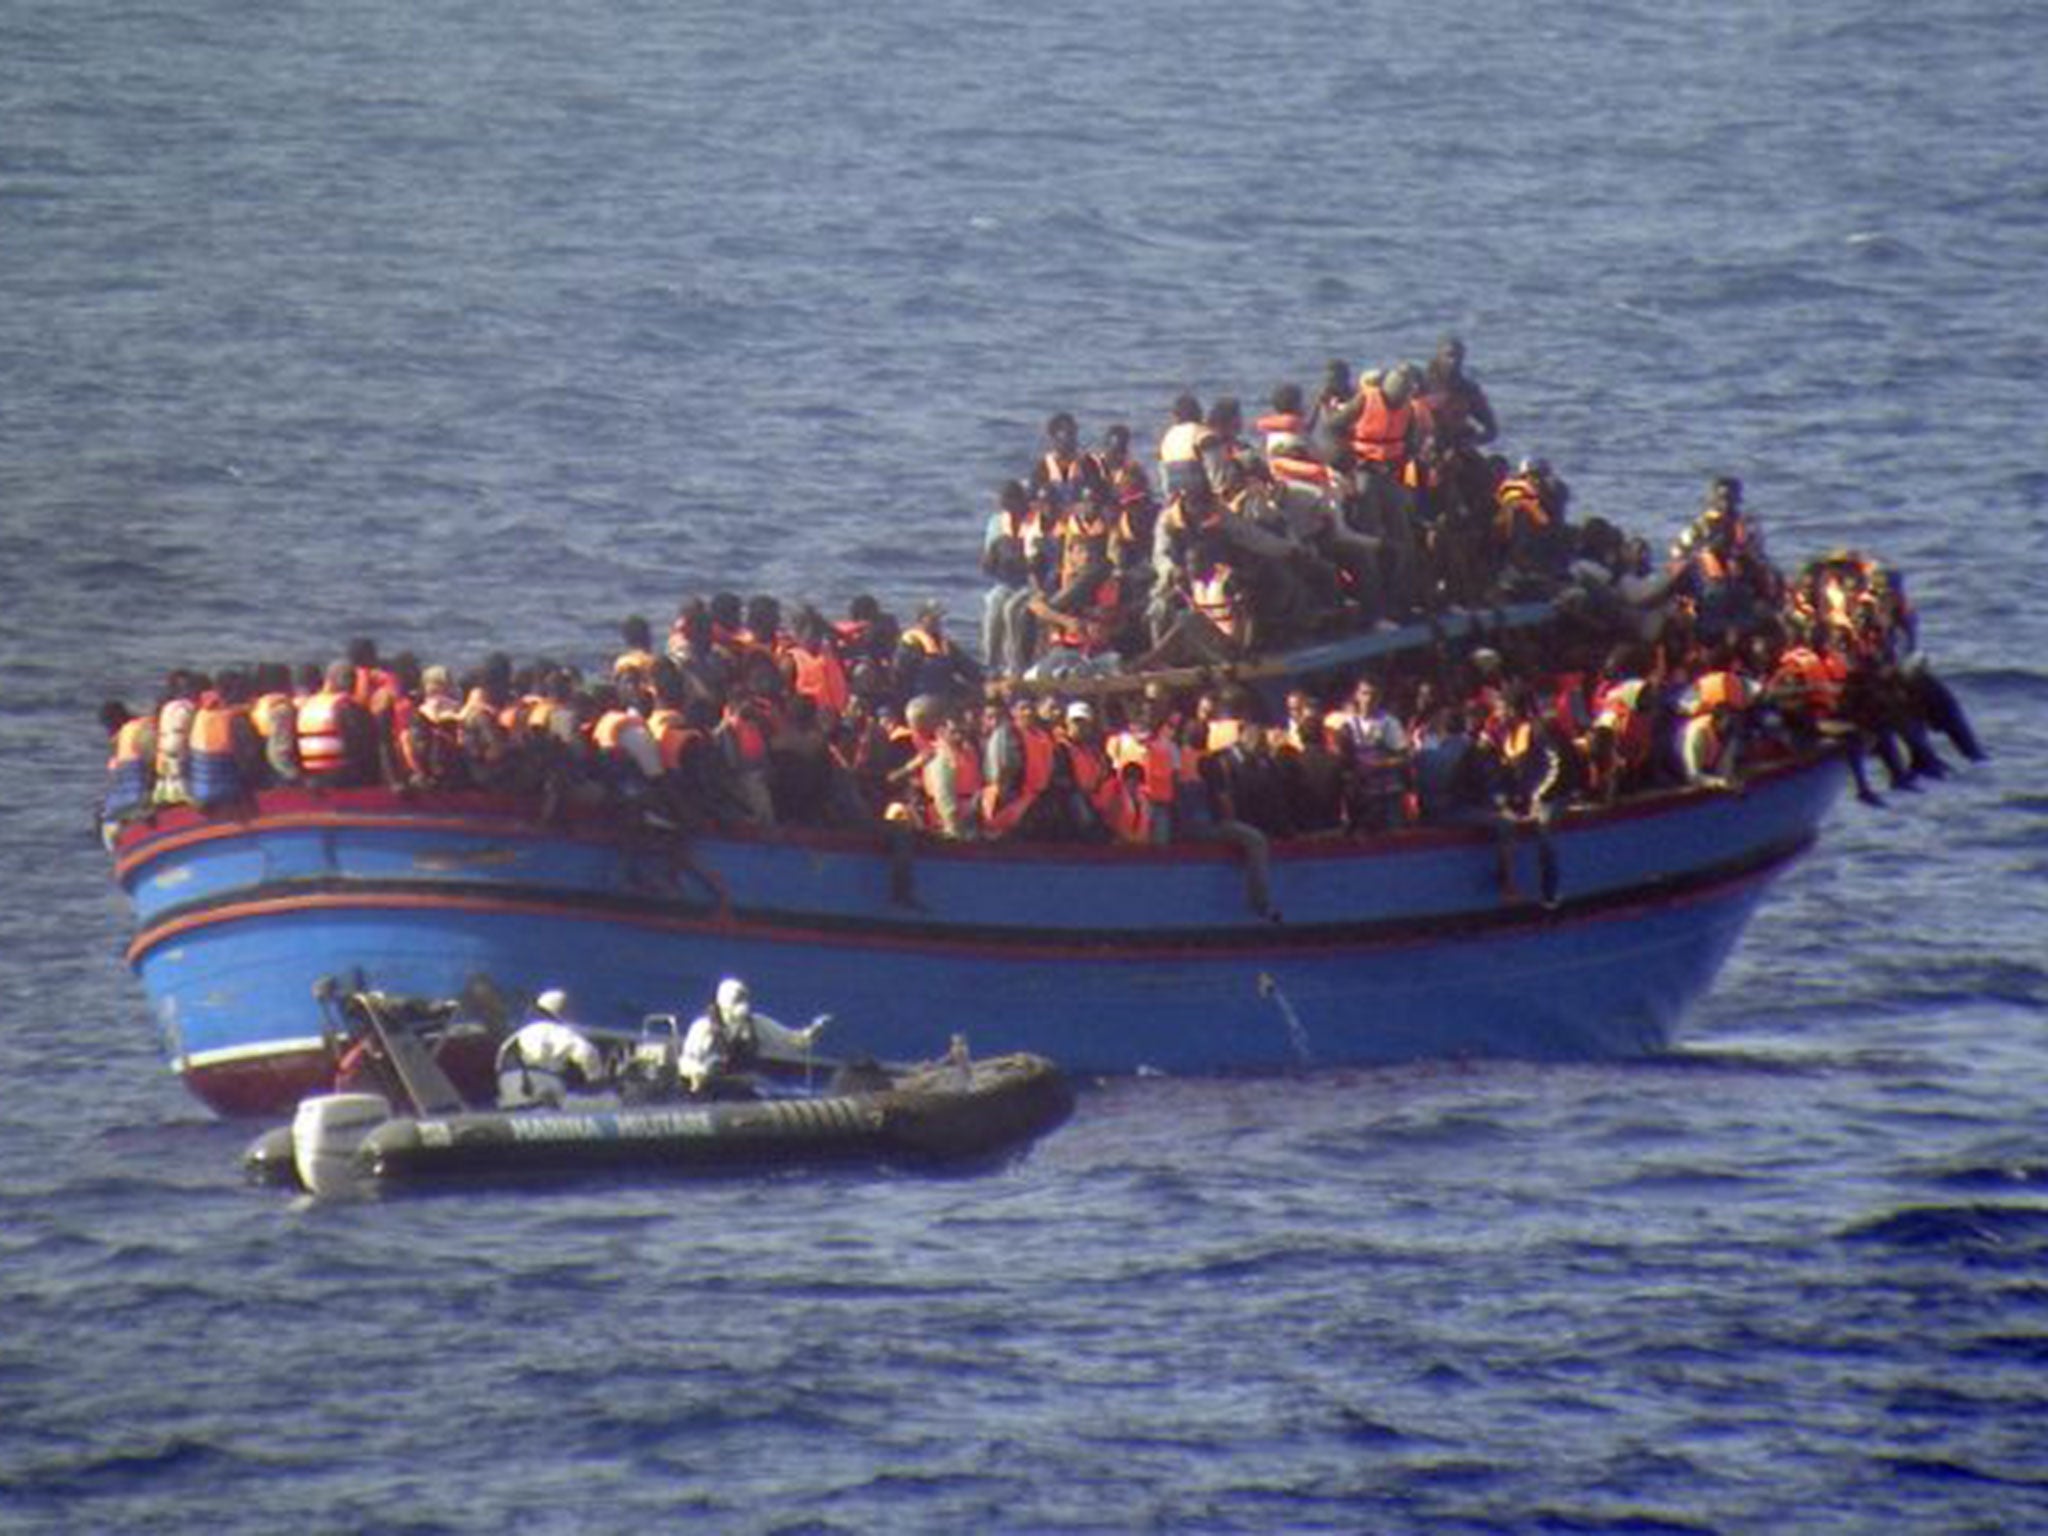 An Italian navy motor boat approaches a boat full of migrants making its way to Europe. The boat was carrying almost 600 people – but some 30 died during the journey